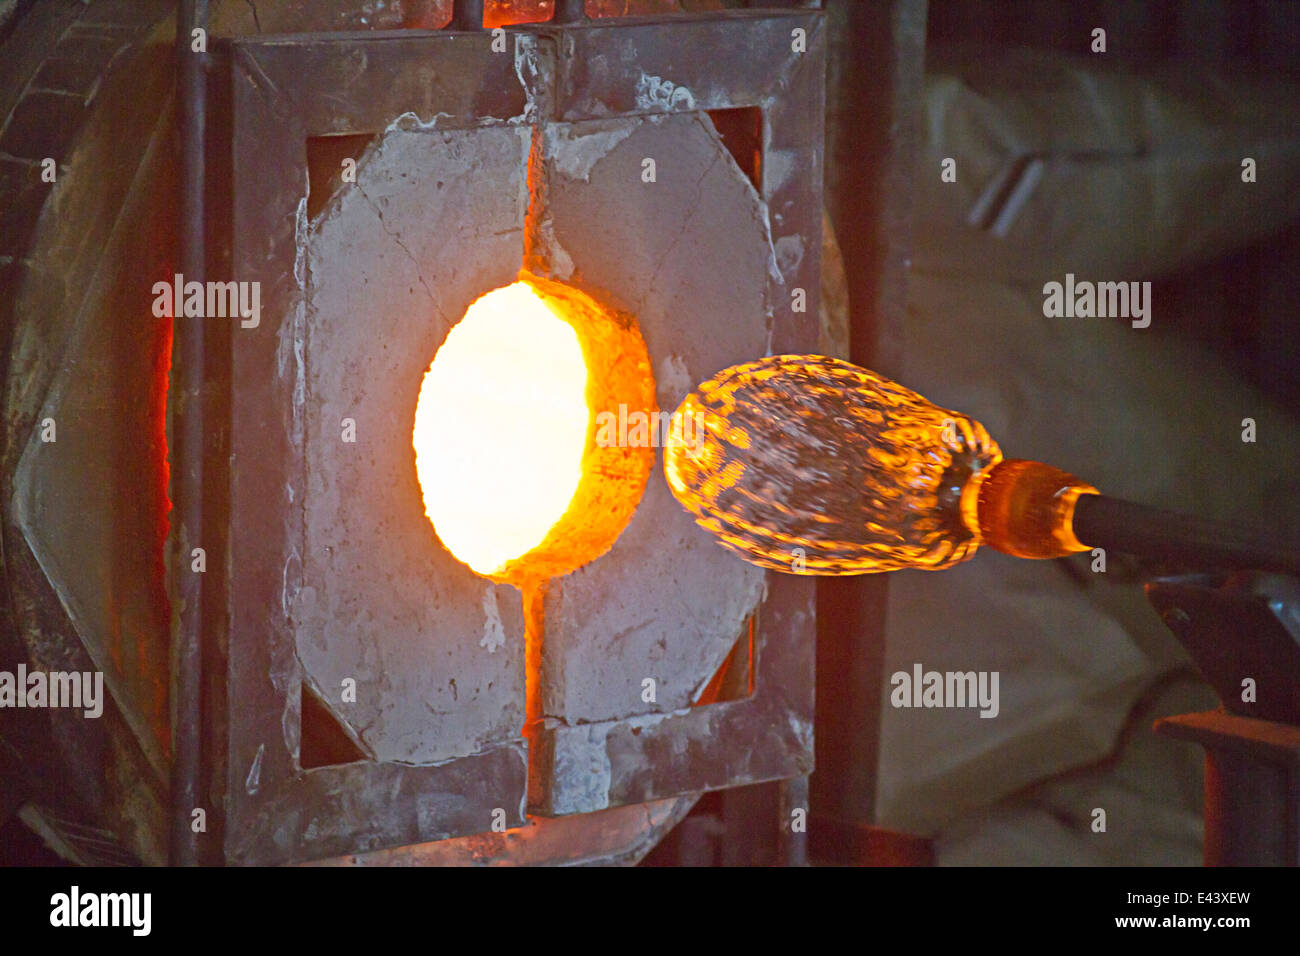 Molten glass being shaped in a forge Stock Photo